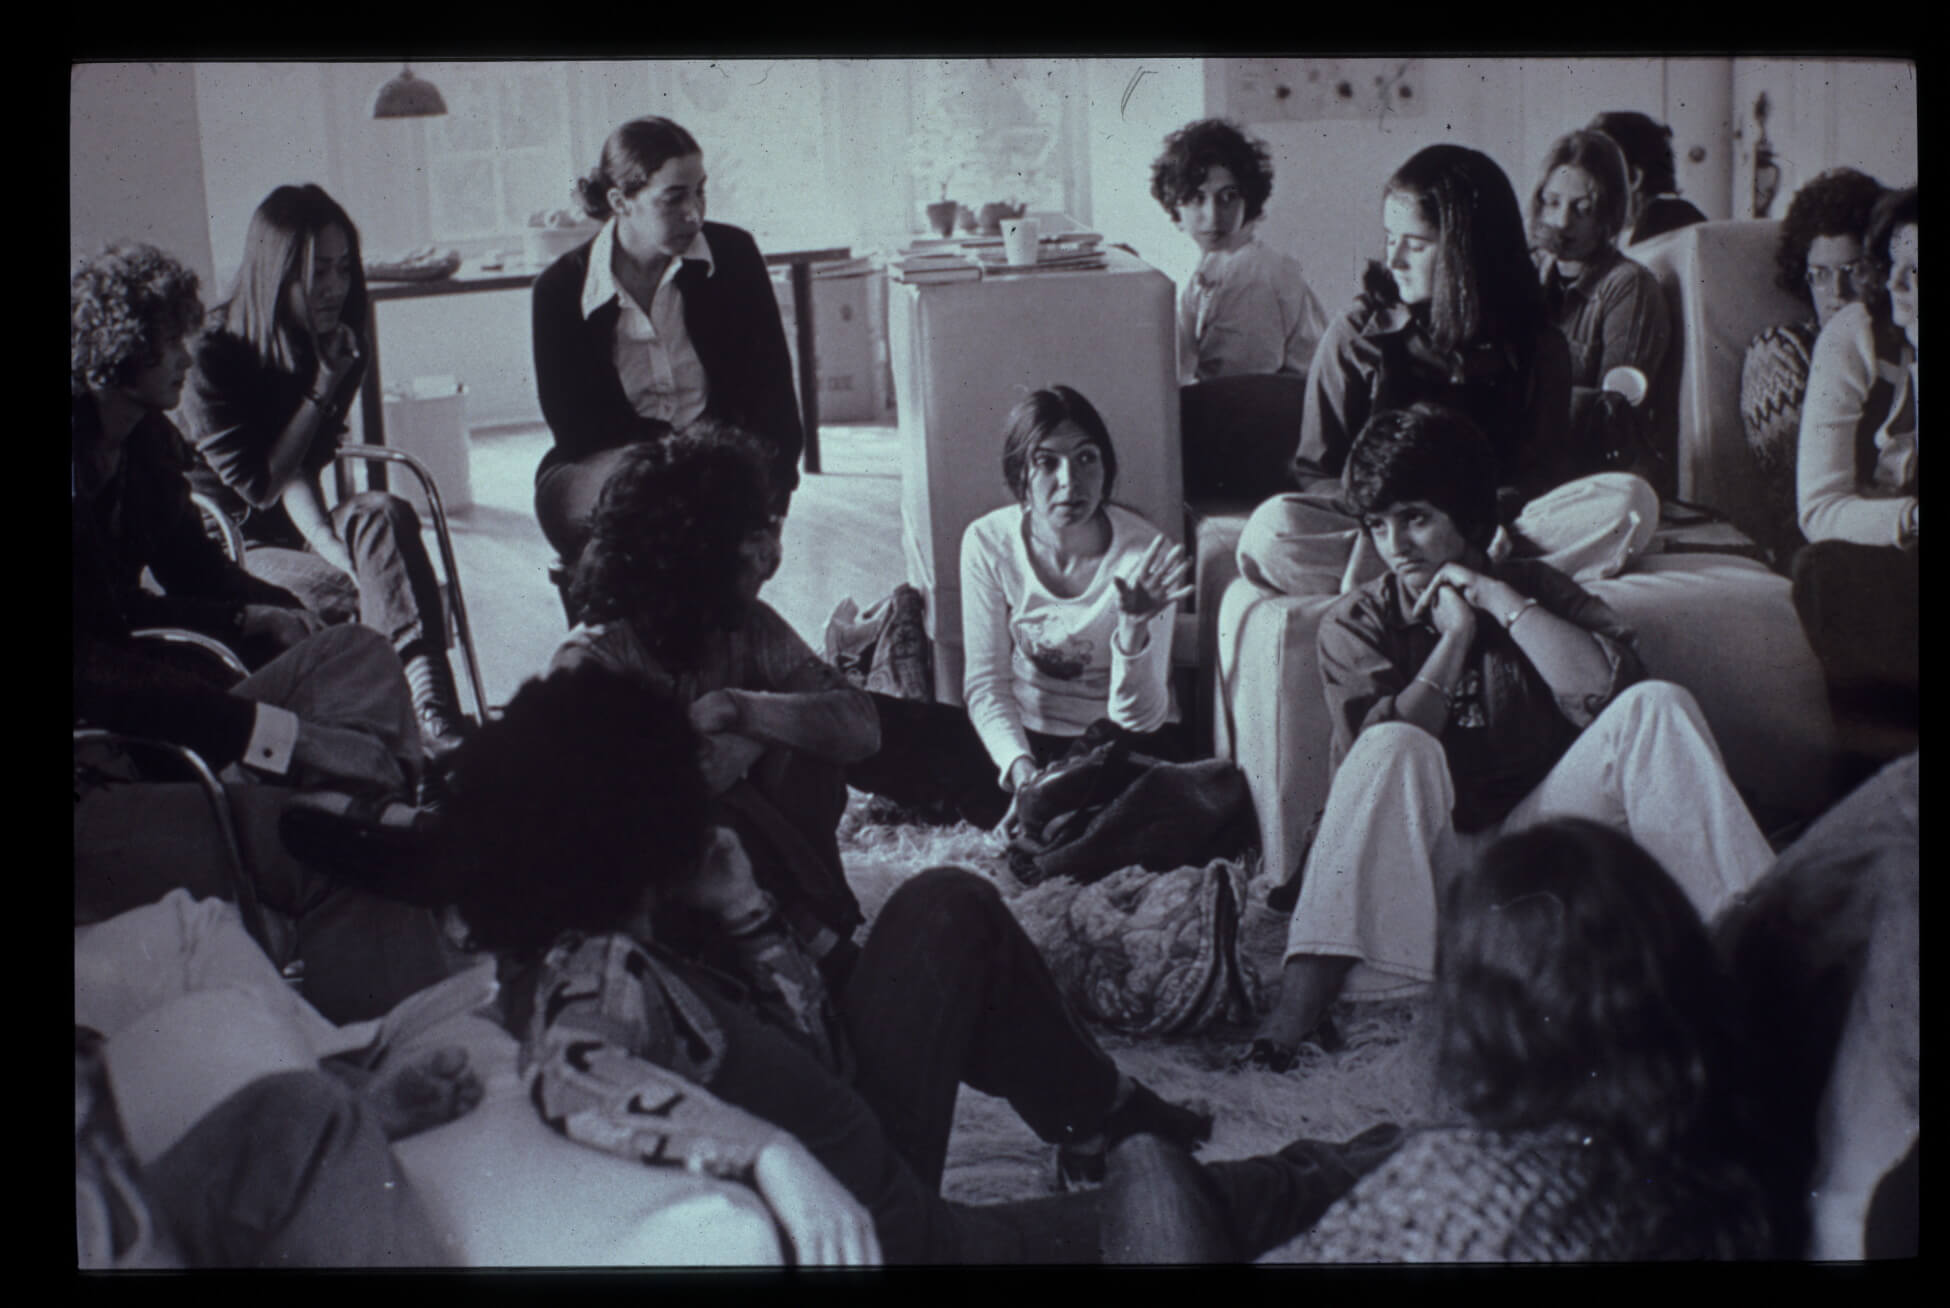 A group of people sits together. A few sit on rugs on the floor, while others sit in chairs and on the sofa.